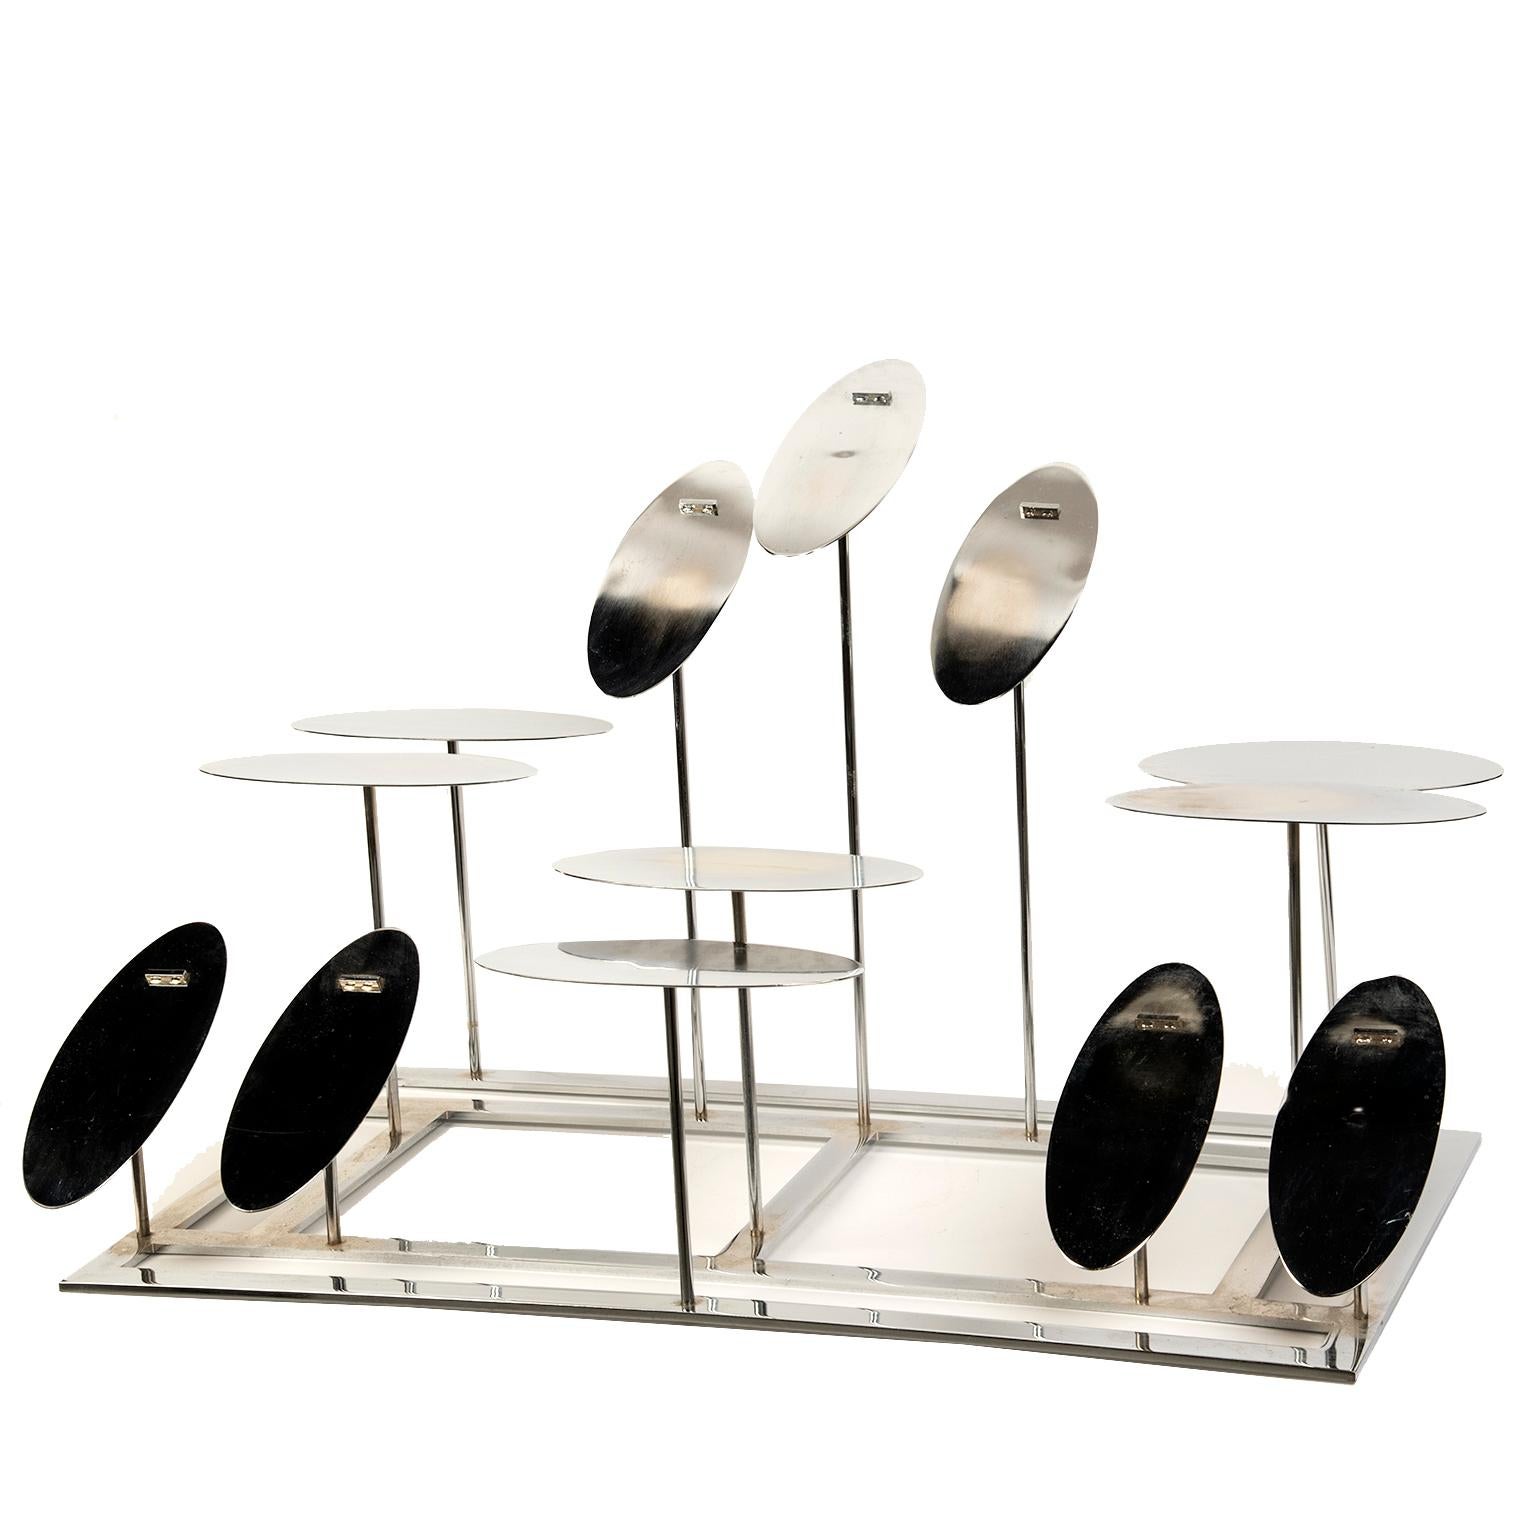 These unique and chic vintage stainless steel shoe displays are perfect for home to feature and organize 
your favorite shoes. They were designed for a high end shoe retailer in the 1980’s and are almost
sculptural in appearance with their varying